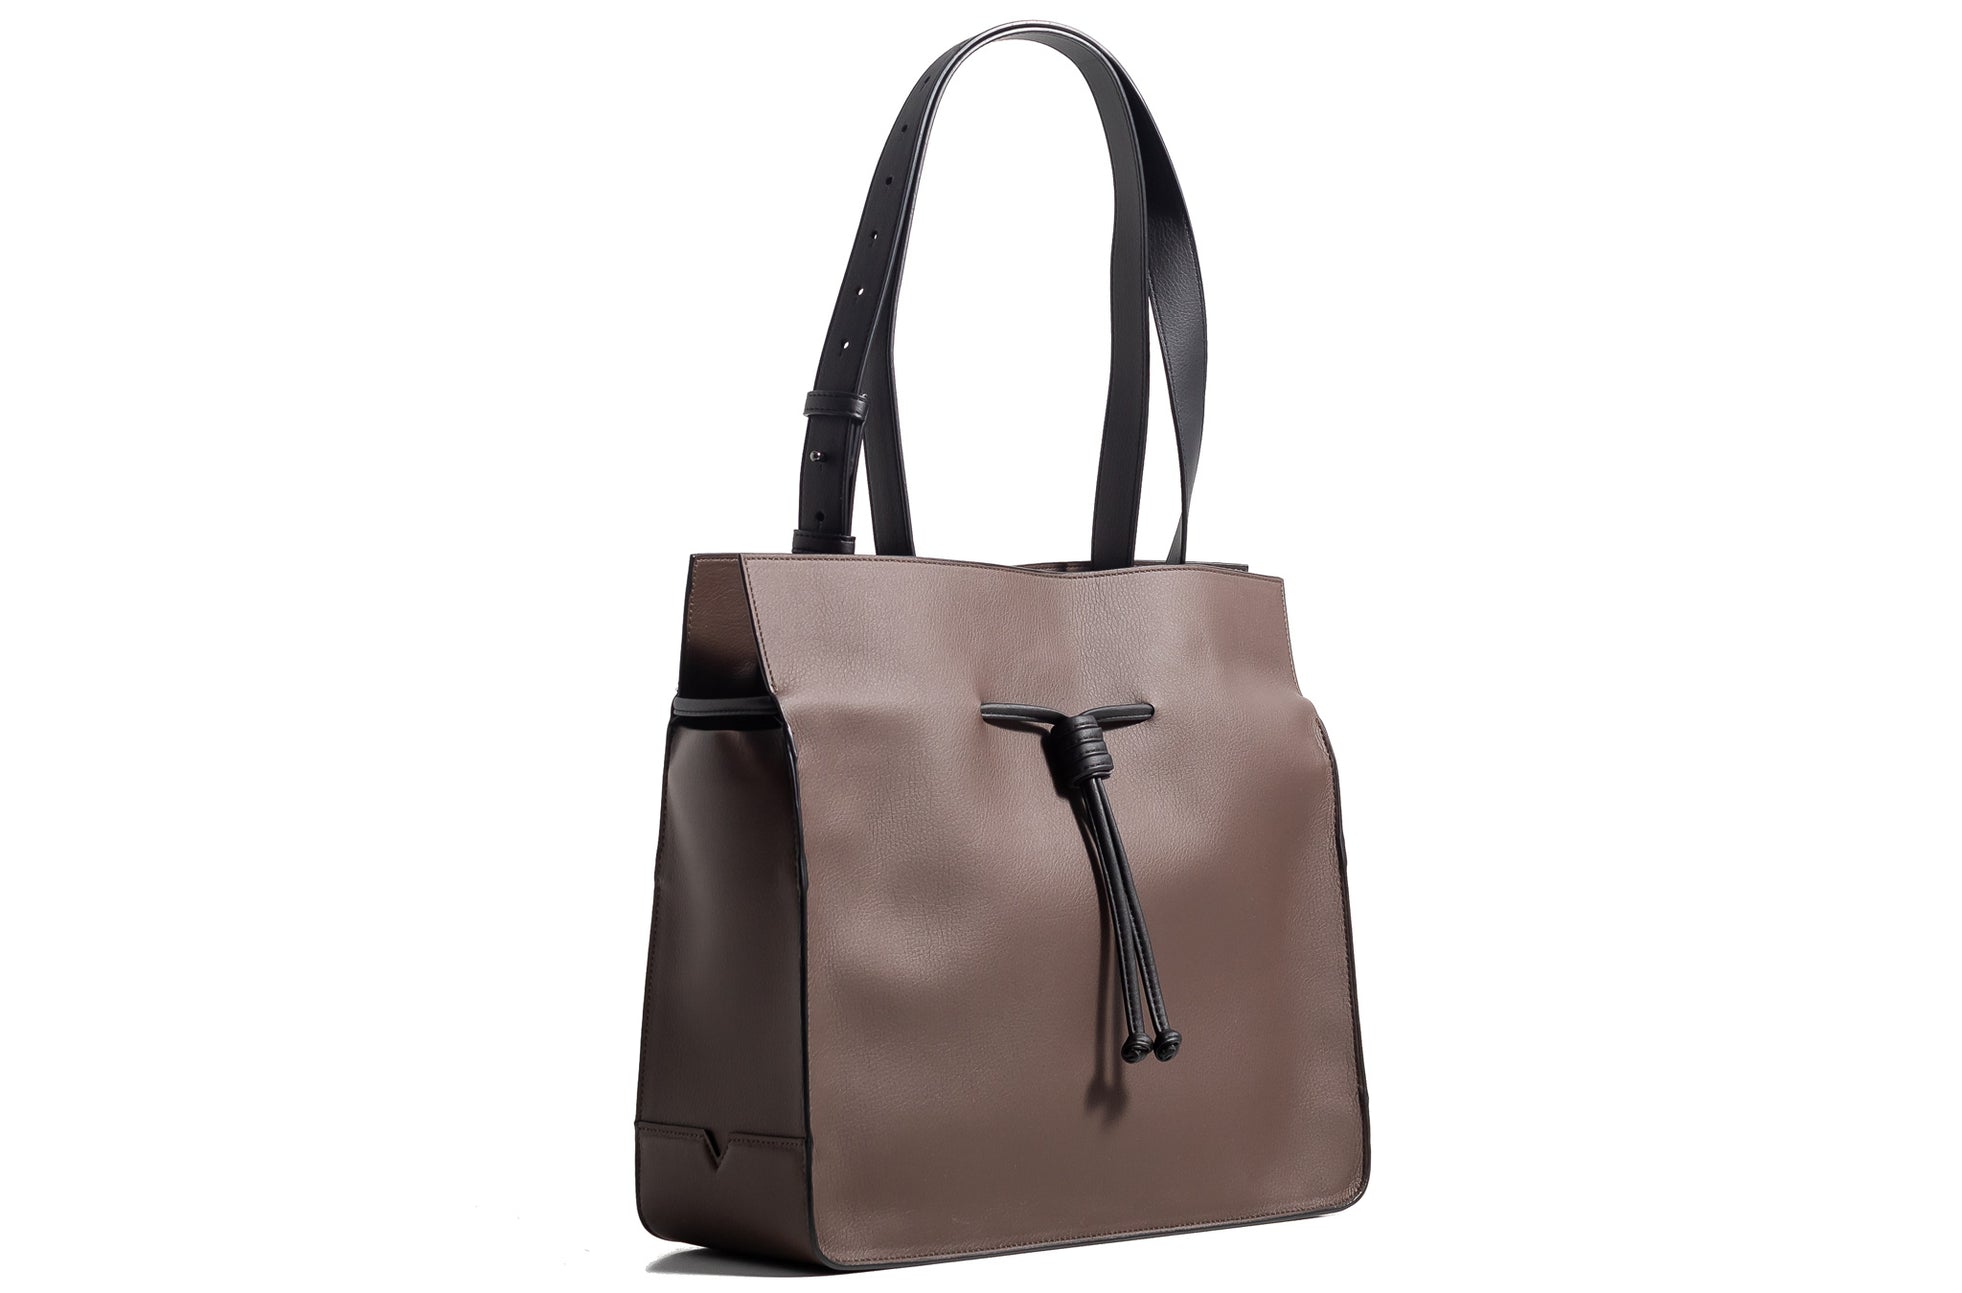 The Medium Shopper in Technik in Taupe and Black image 3